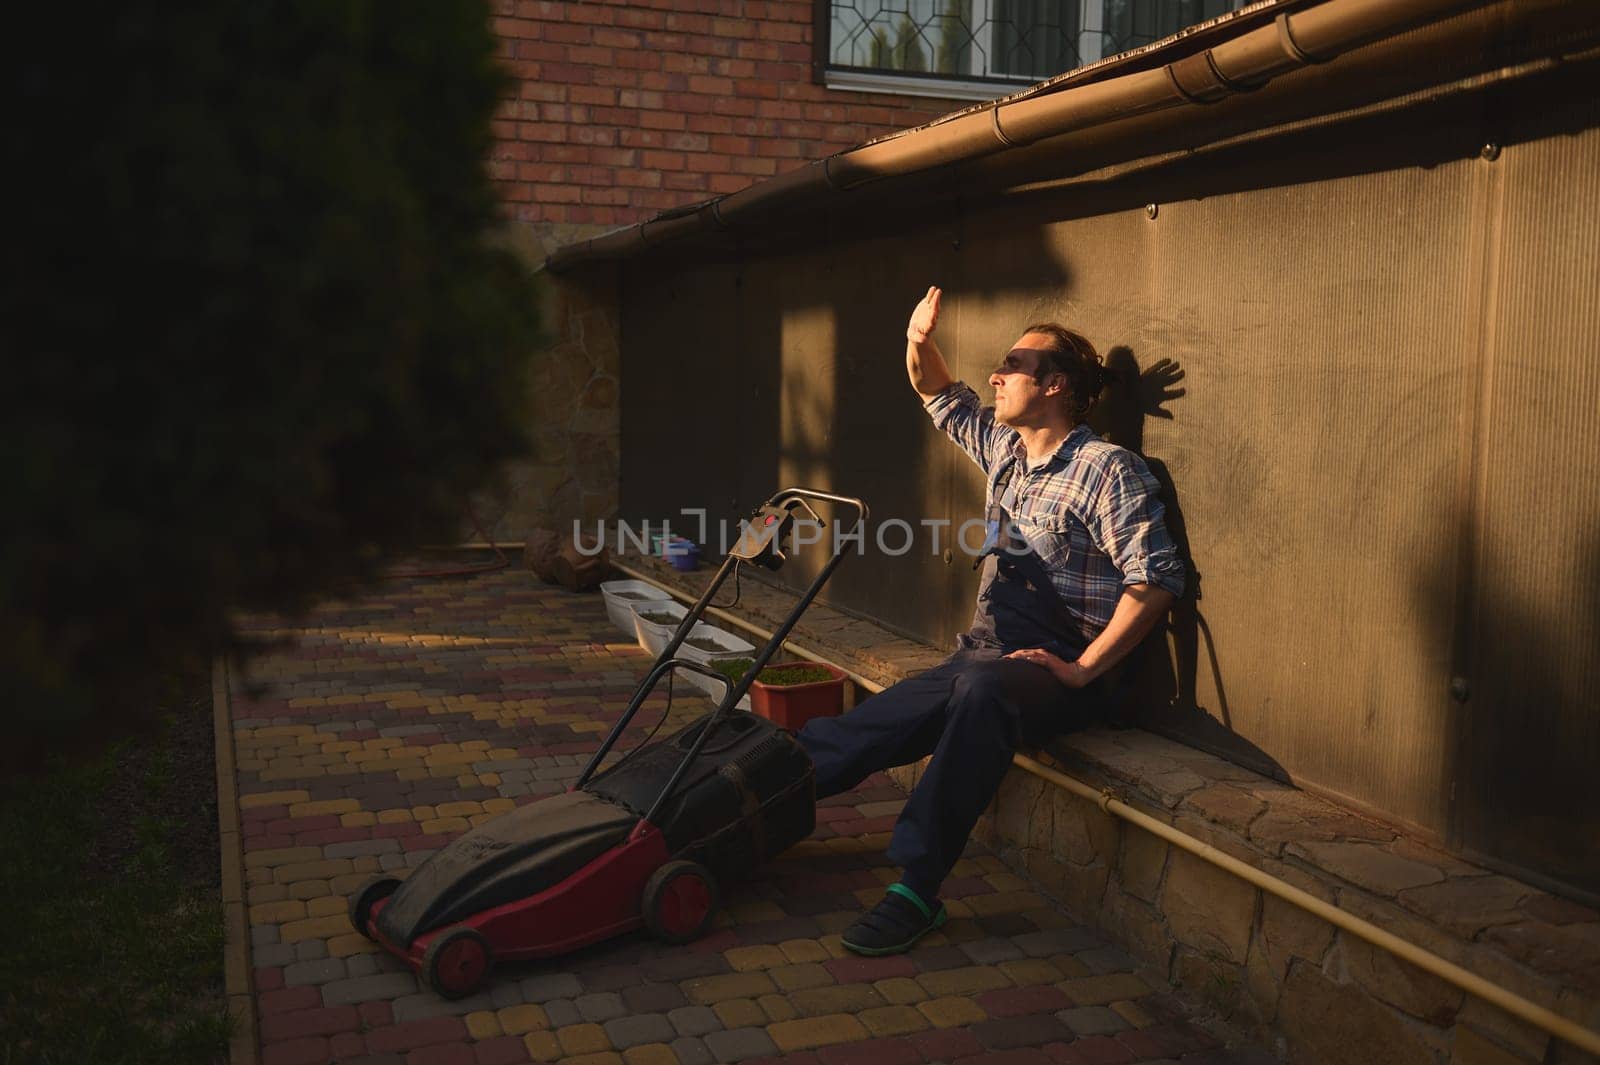 Portrait of a worker looking at sunset after finishing hard working day in the garden, holding his hand over his face, sitting outdoors near a lawn mower, relaxing. People. Workman. Labor. Lifestyle